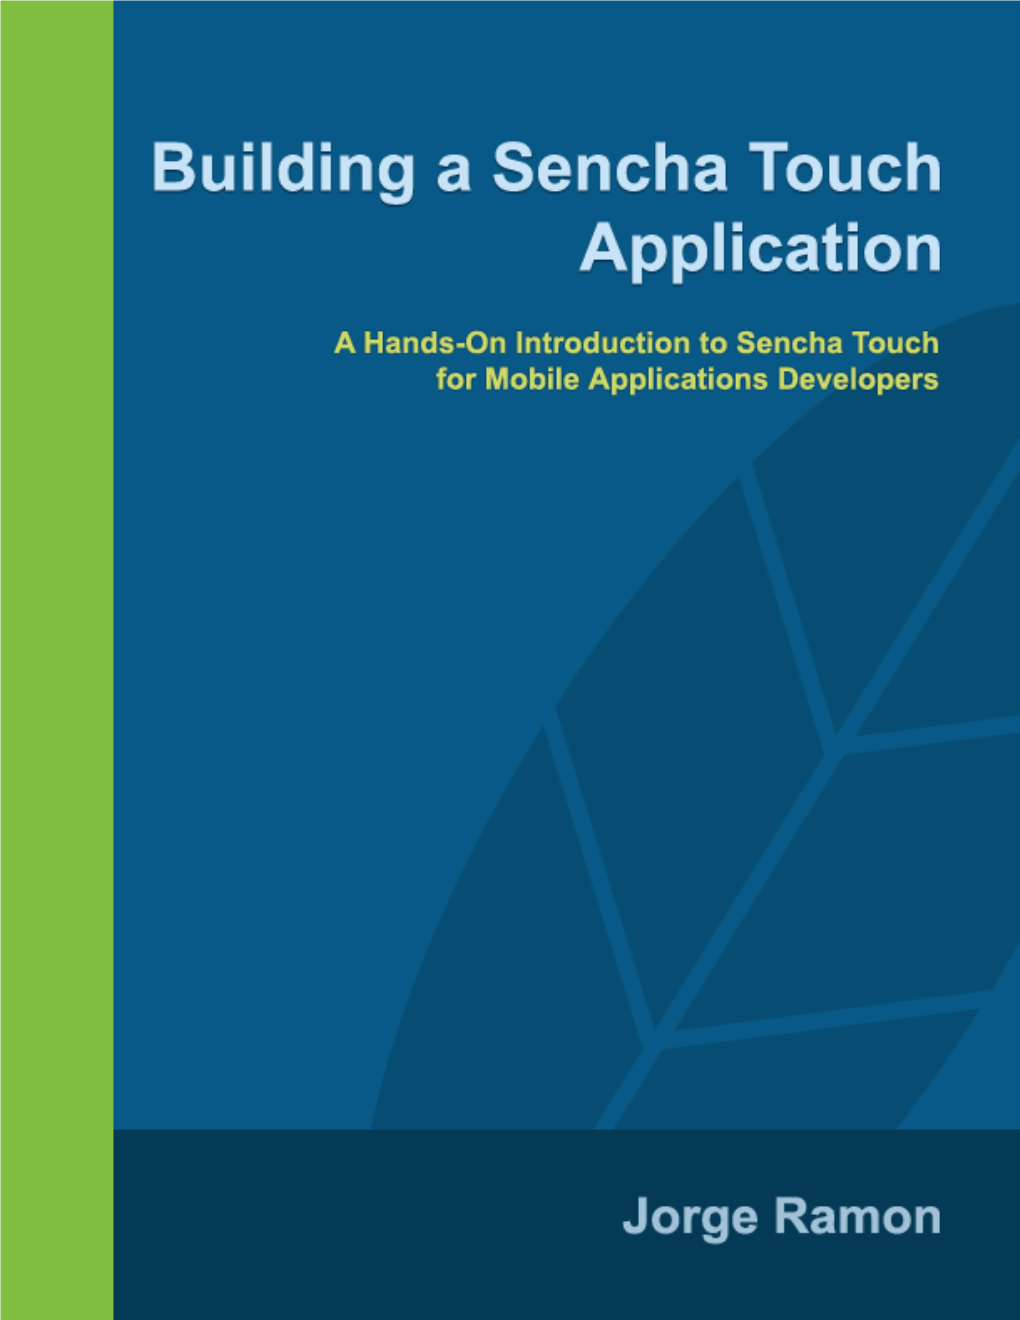 Building a Sencha Touch Application